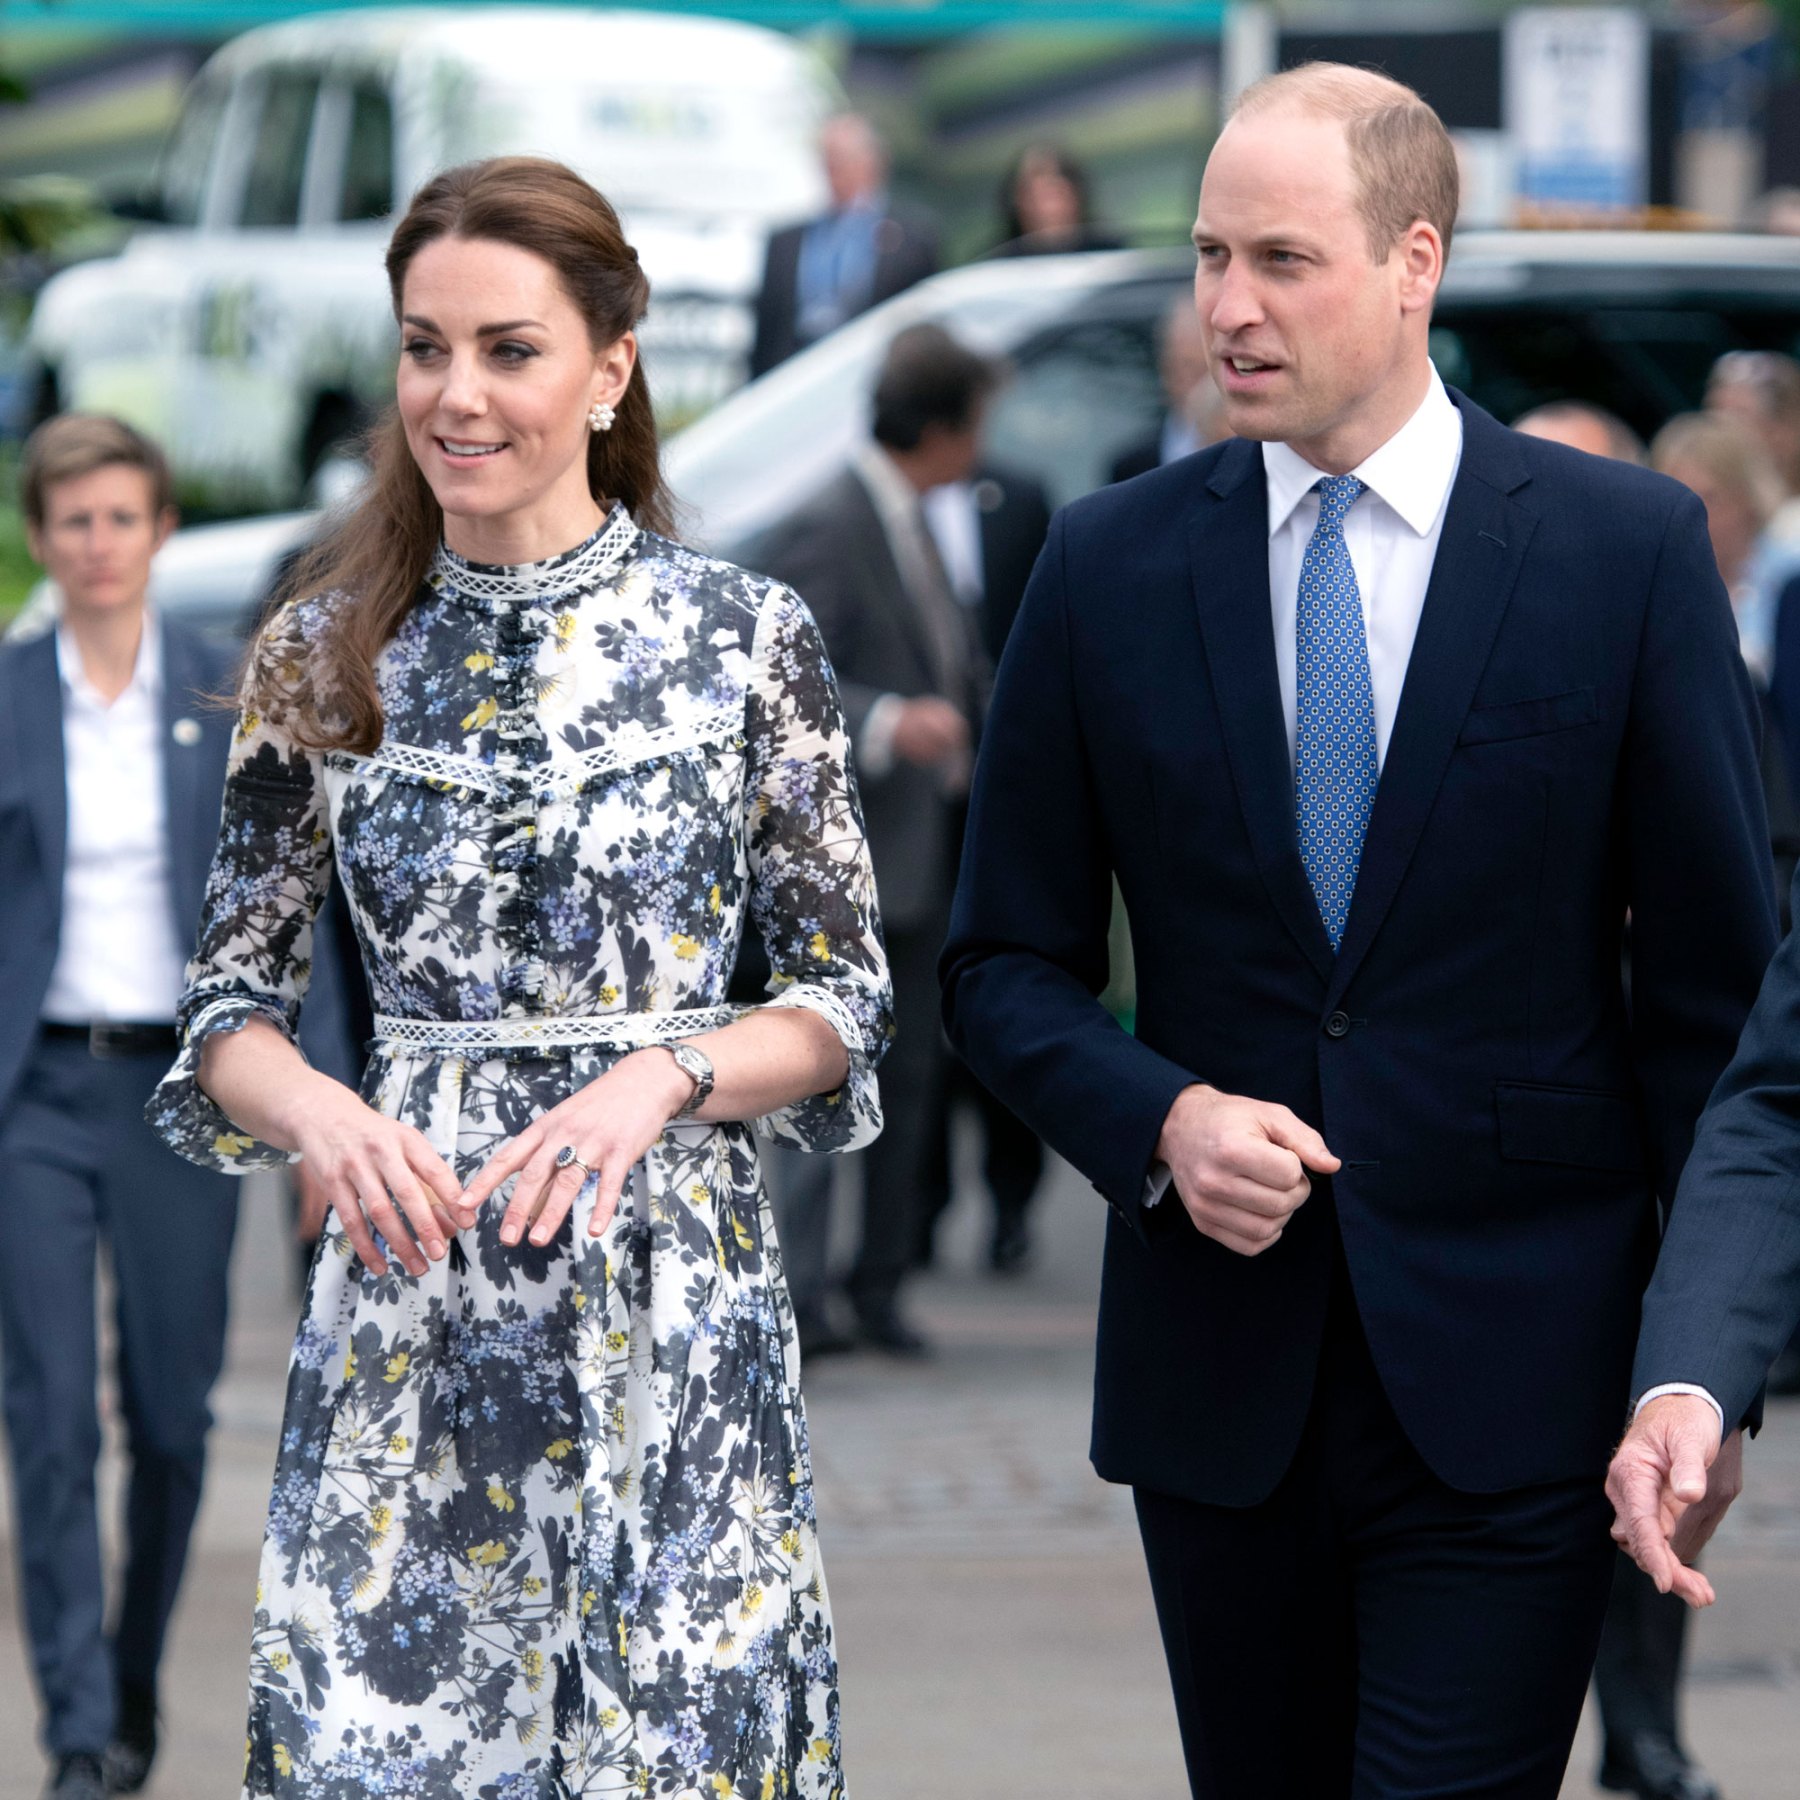 How Prince William, Duchess Kate Bounced Back After Affair Rumors